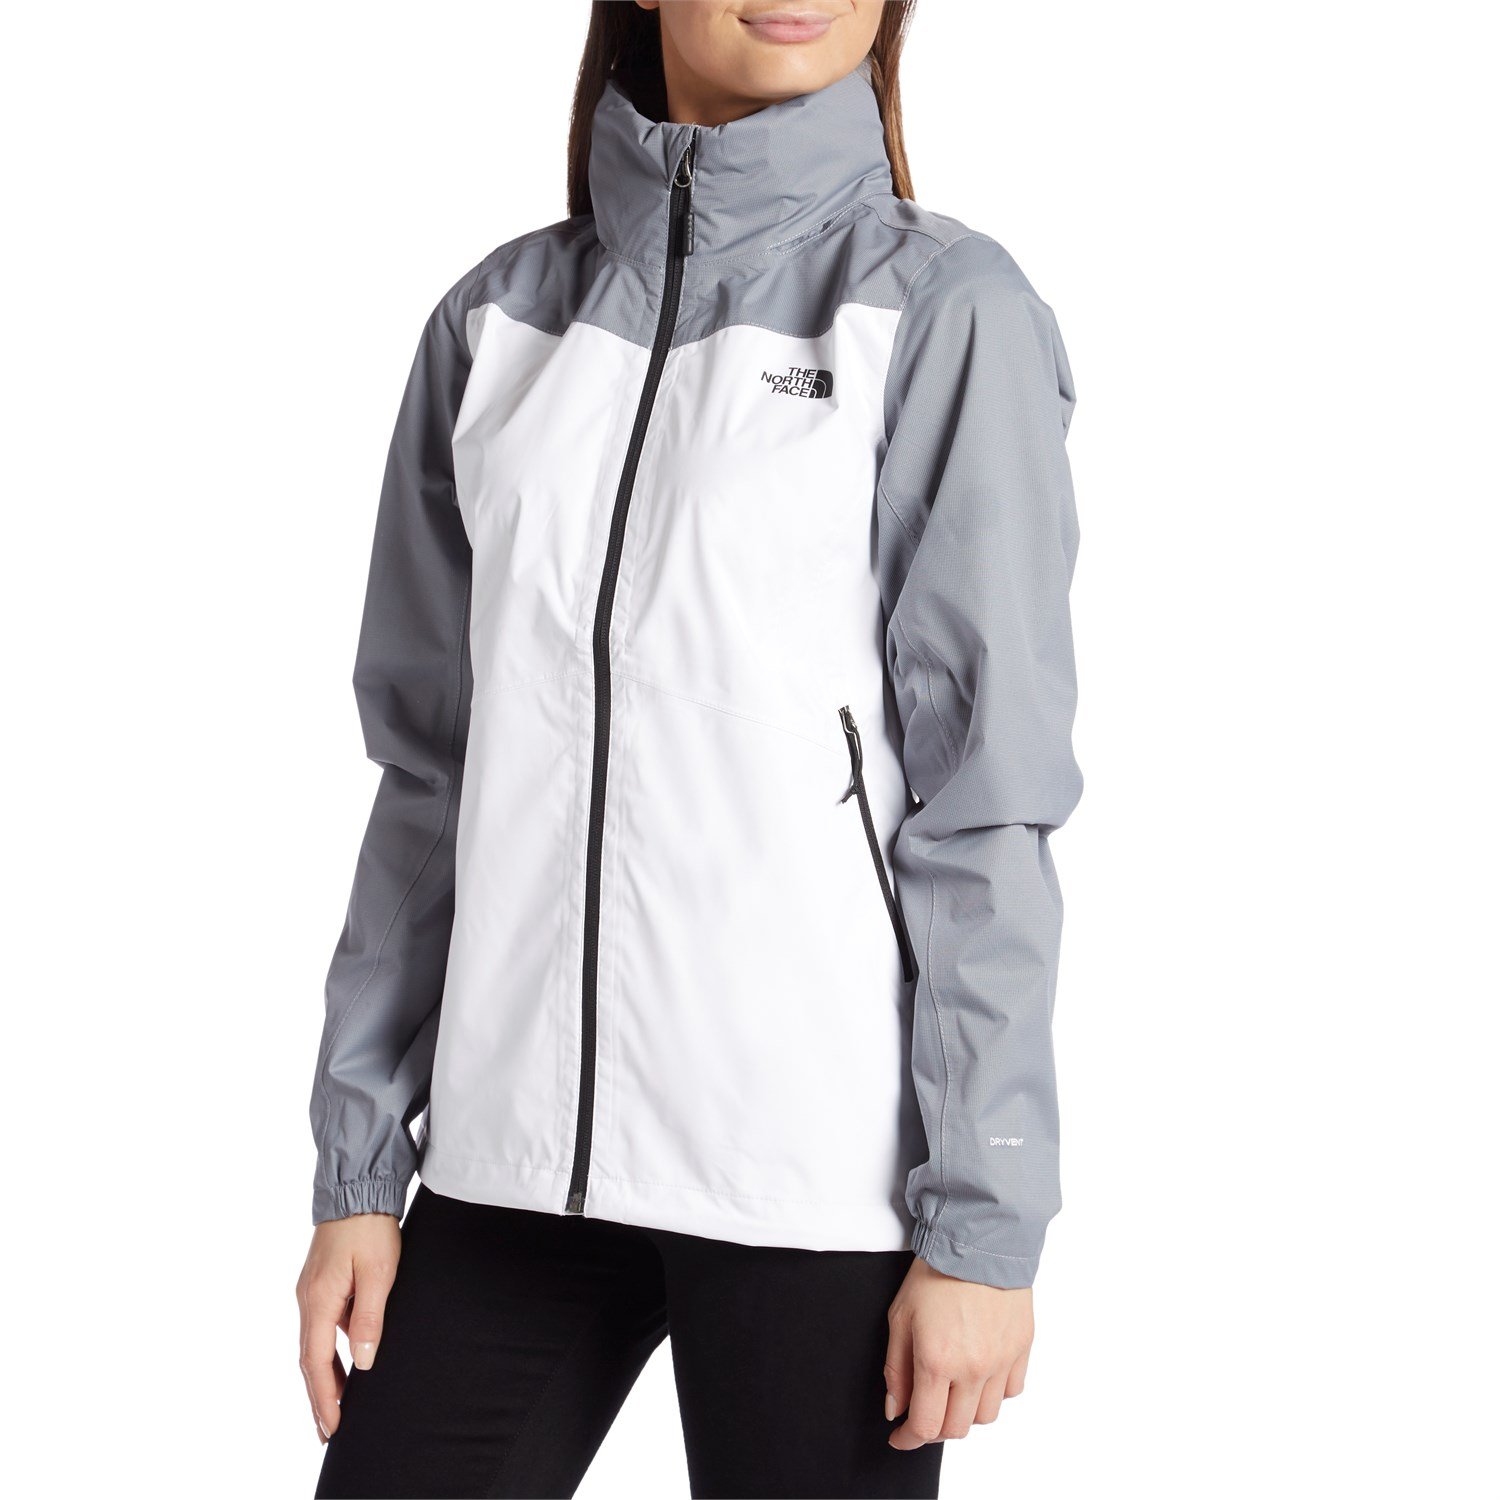 The North Face Resolve Plus Jacket 